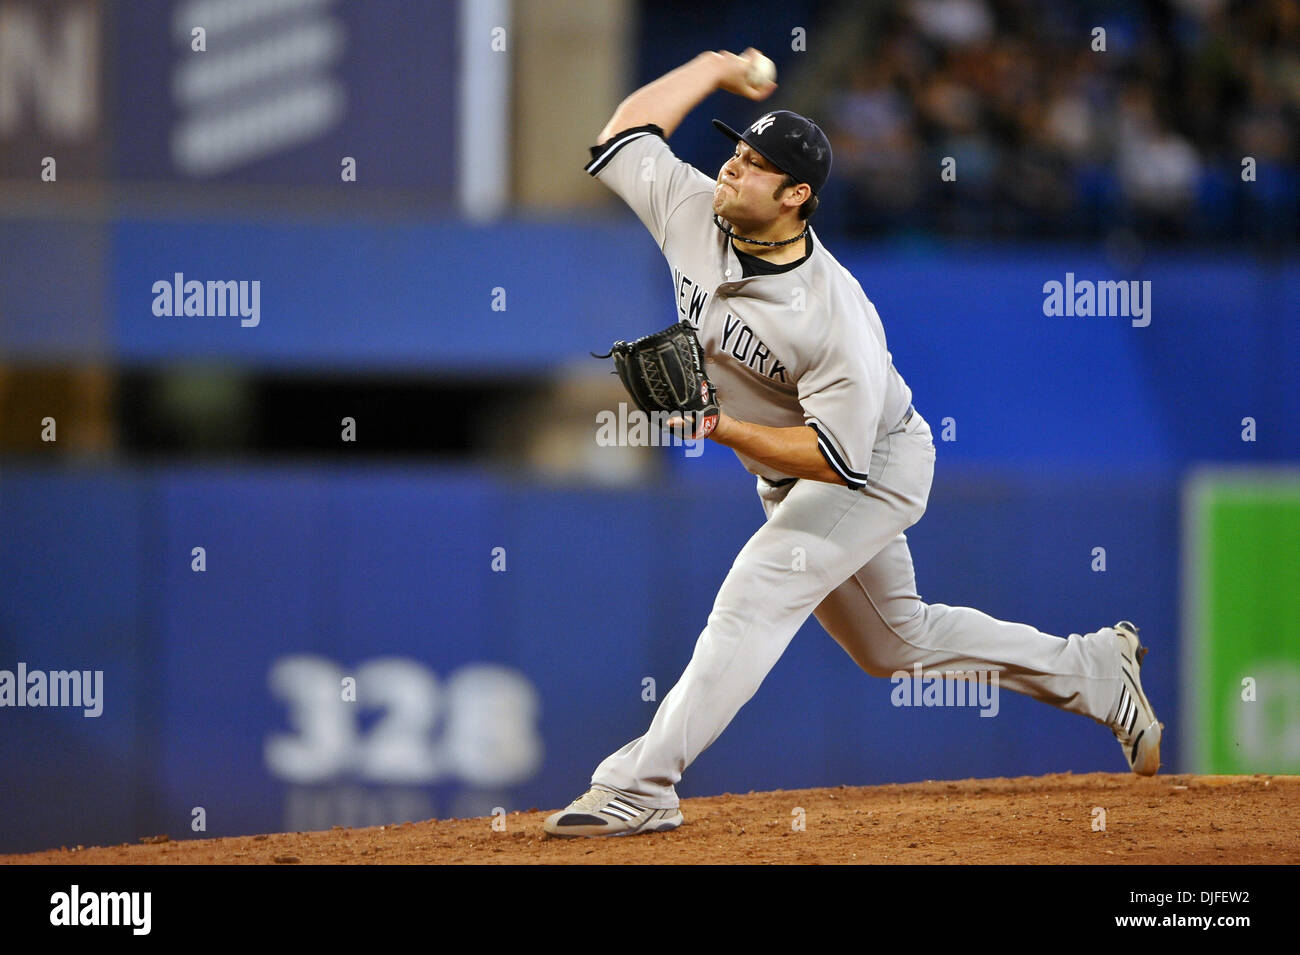 June 06, 2010 - Toronto, Ontario, Canada - 06 June 2010: New York Yankees relief pitcher Joba Chamberlain (62) is seen pitching during Sunday's baseball game, where the New York Yankees defeated the Toronto Blue Jays 4-3 at the Rogers Centre in Toronto, Ontario. (Credit Image: © Adrian Gauthier/Southcreek Global/ZUMApress.com) Stock Photo